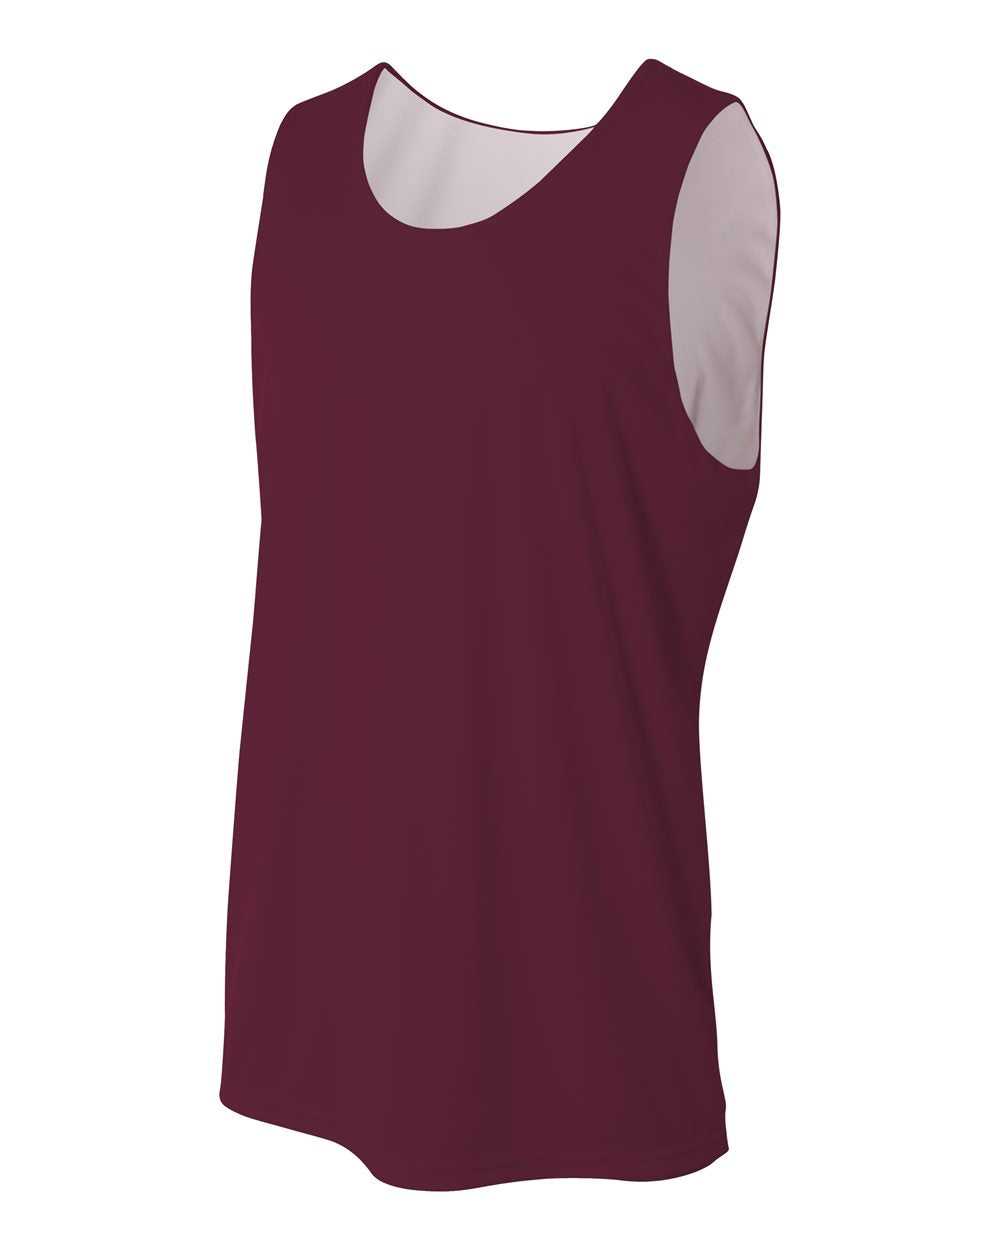 A4 NB2375 Youth Reversible Jump Jersey - Maroon White - HIT a Double